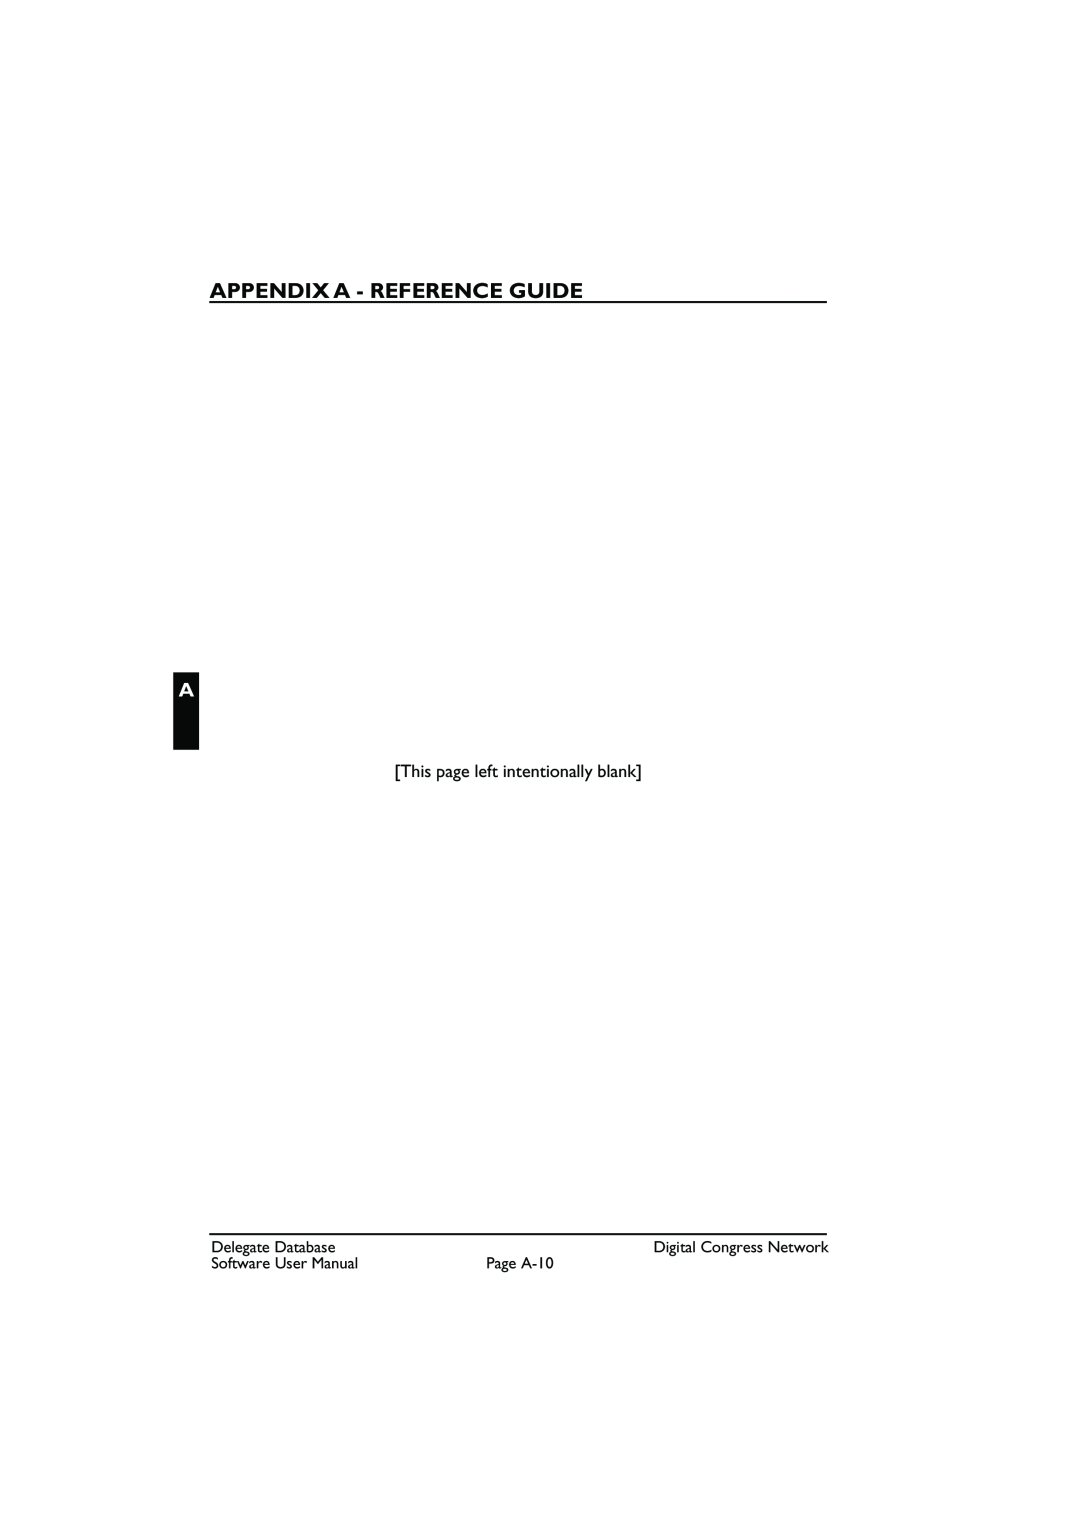 Bosch Appliances LBB3580 user manual Appendix A - Reference Guide, Delegate Database, Page A-10, Digital Congress Network 